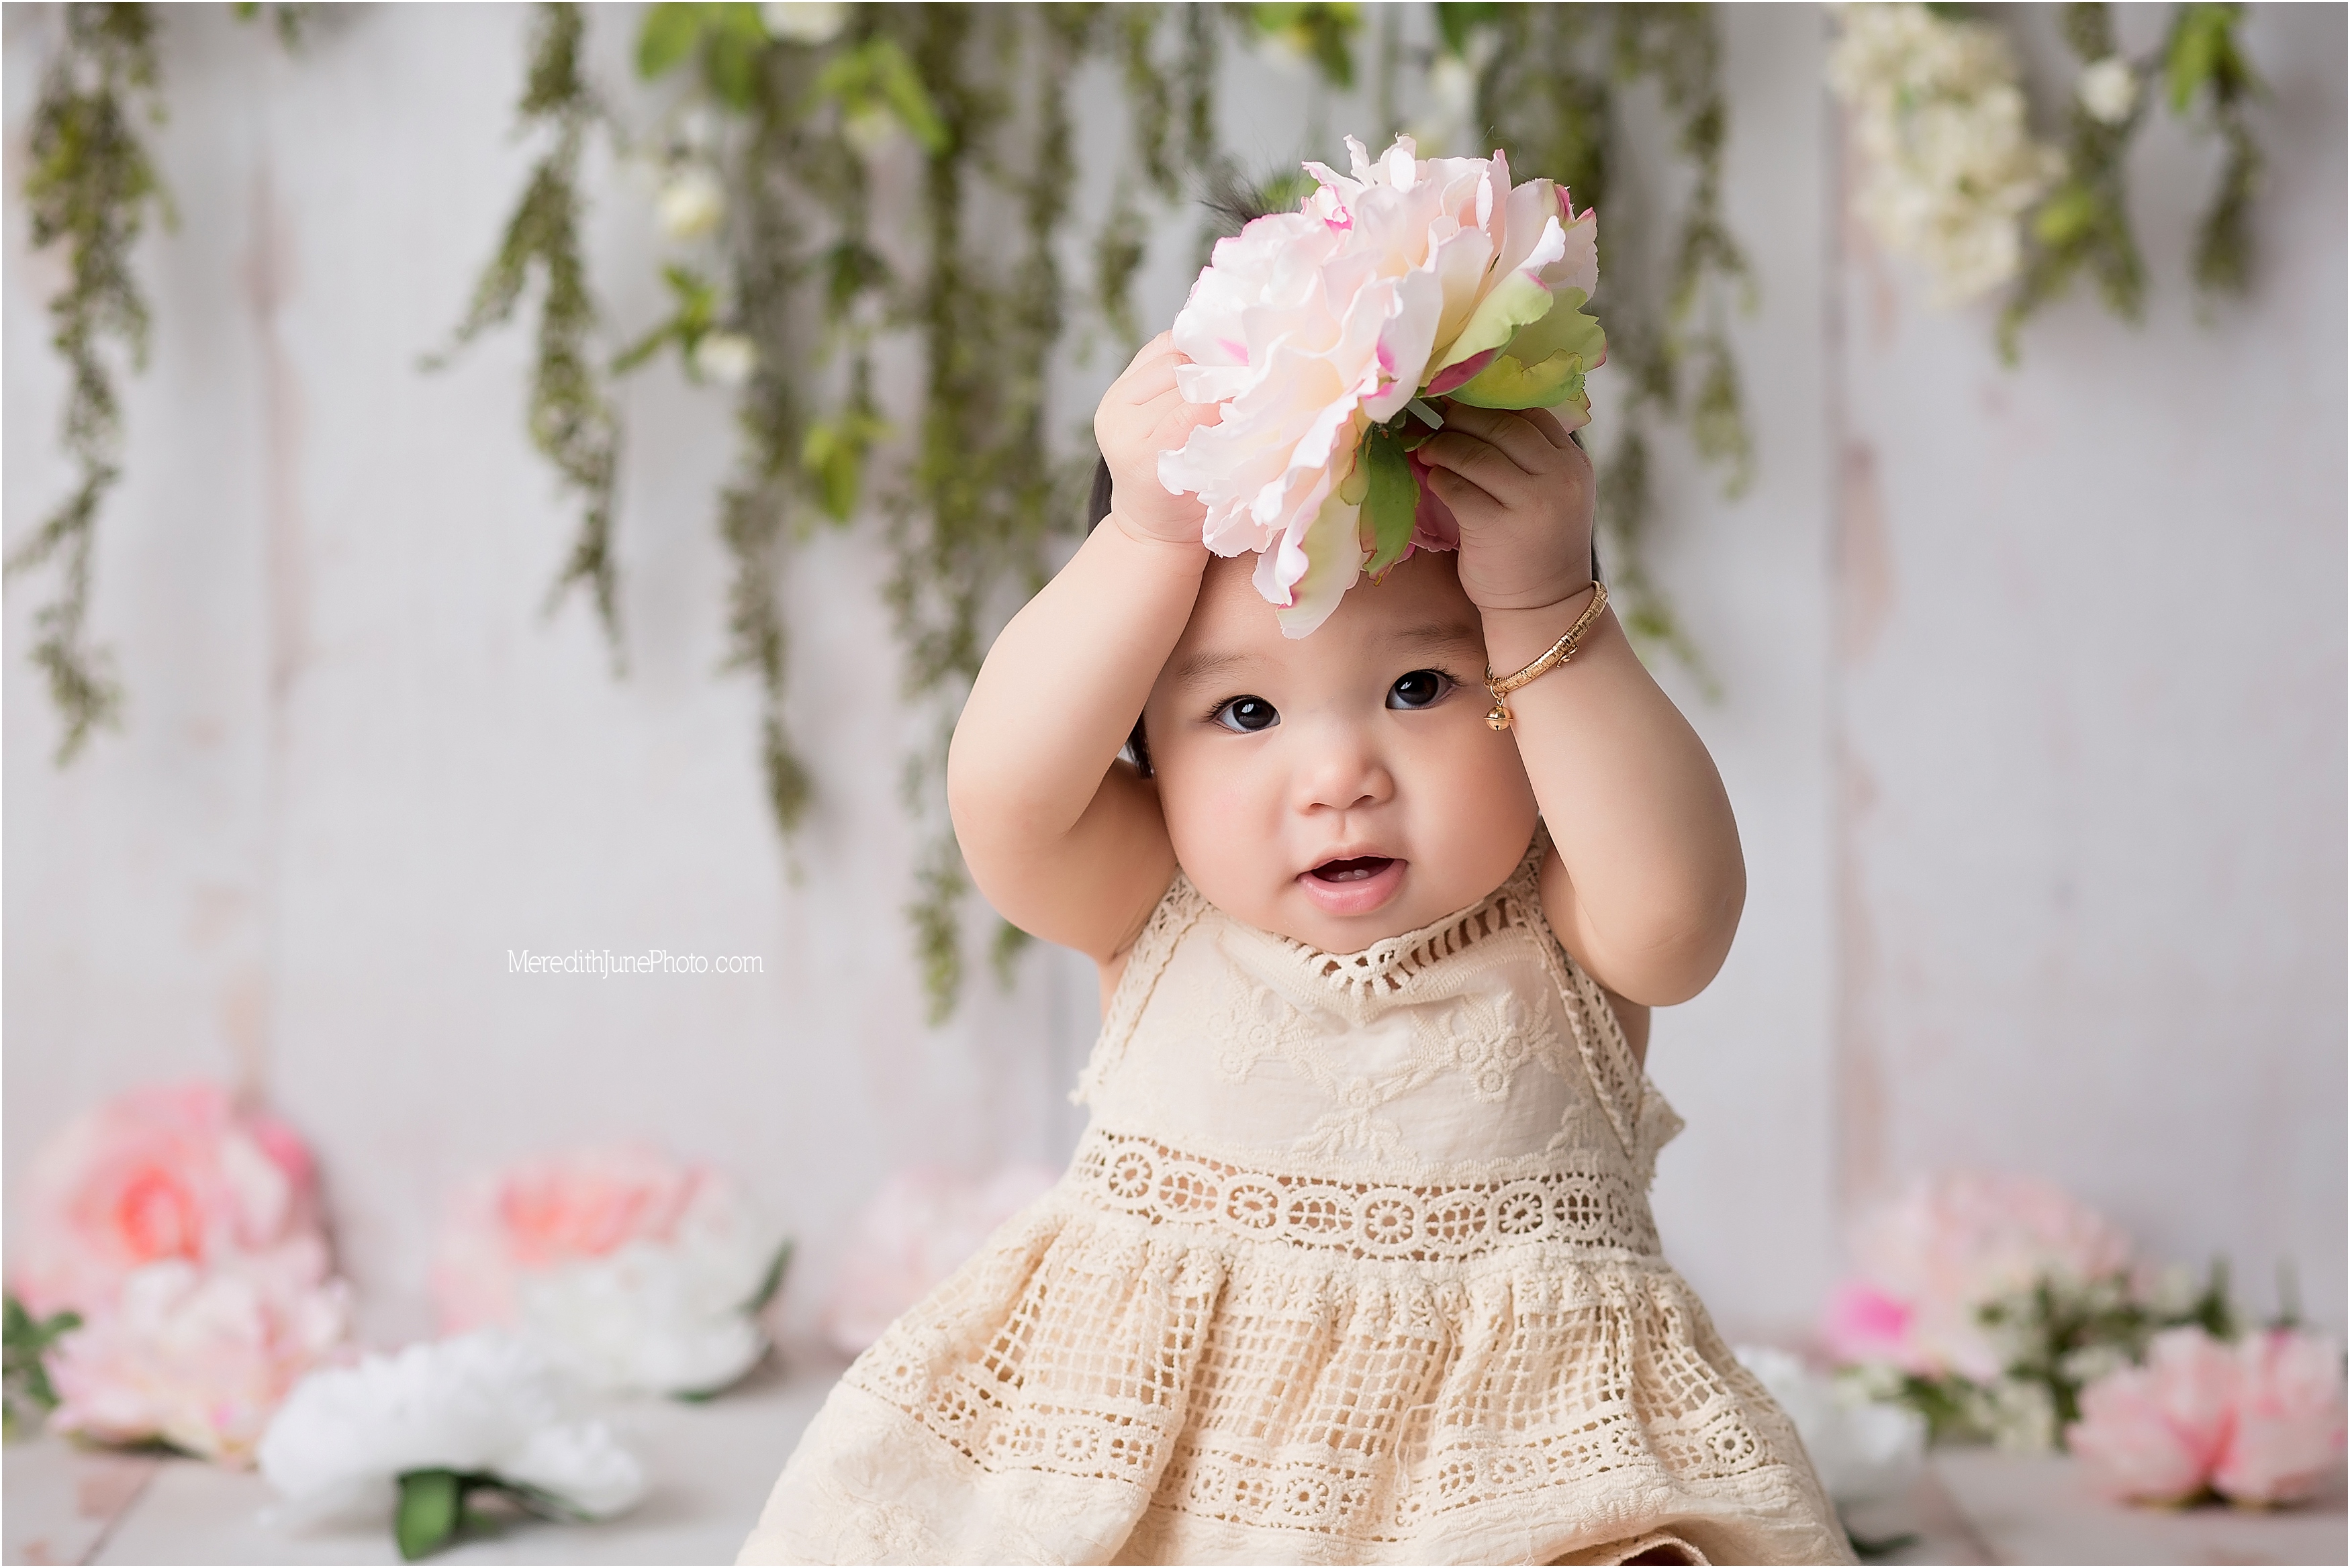 Baby girl cake smash session at Meredith June Photography